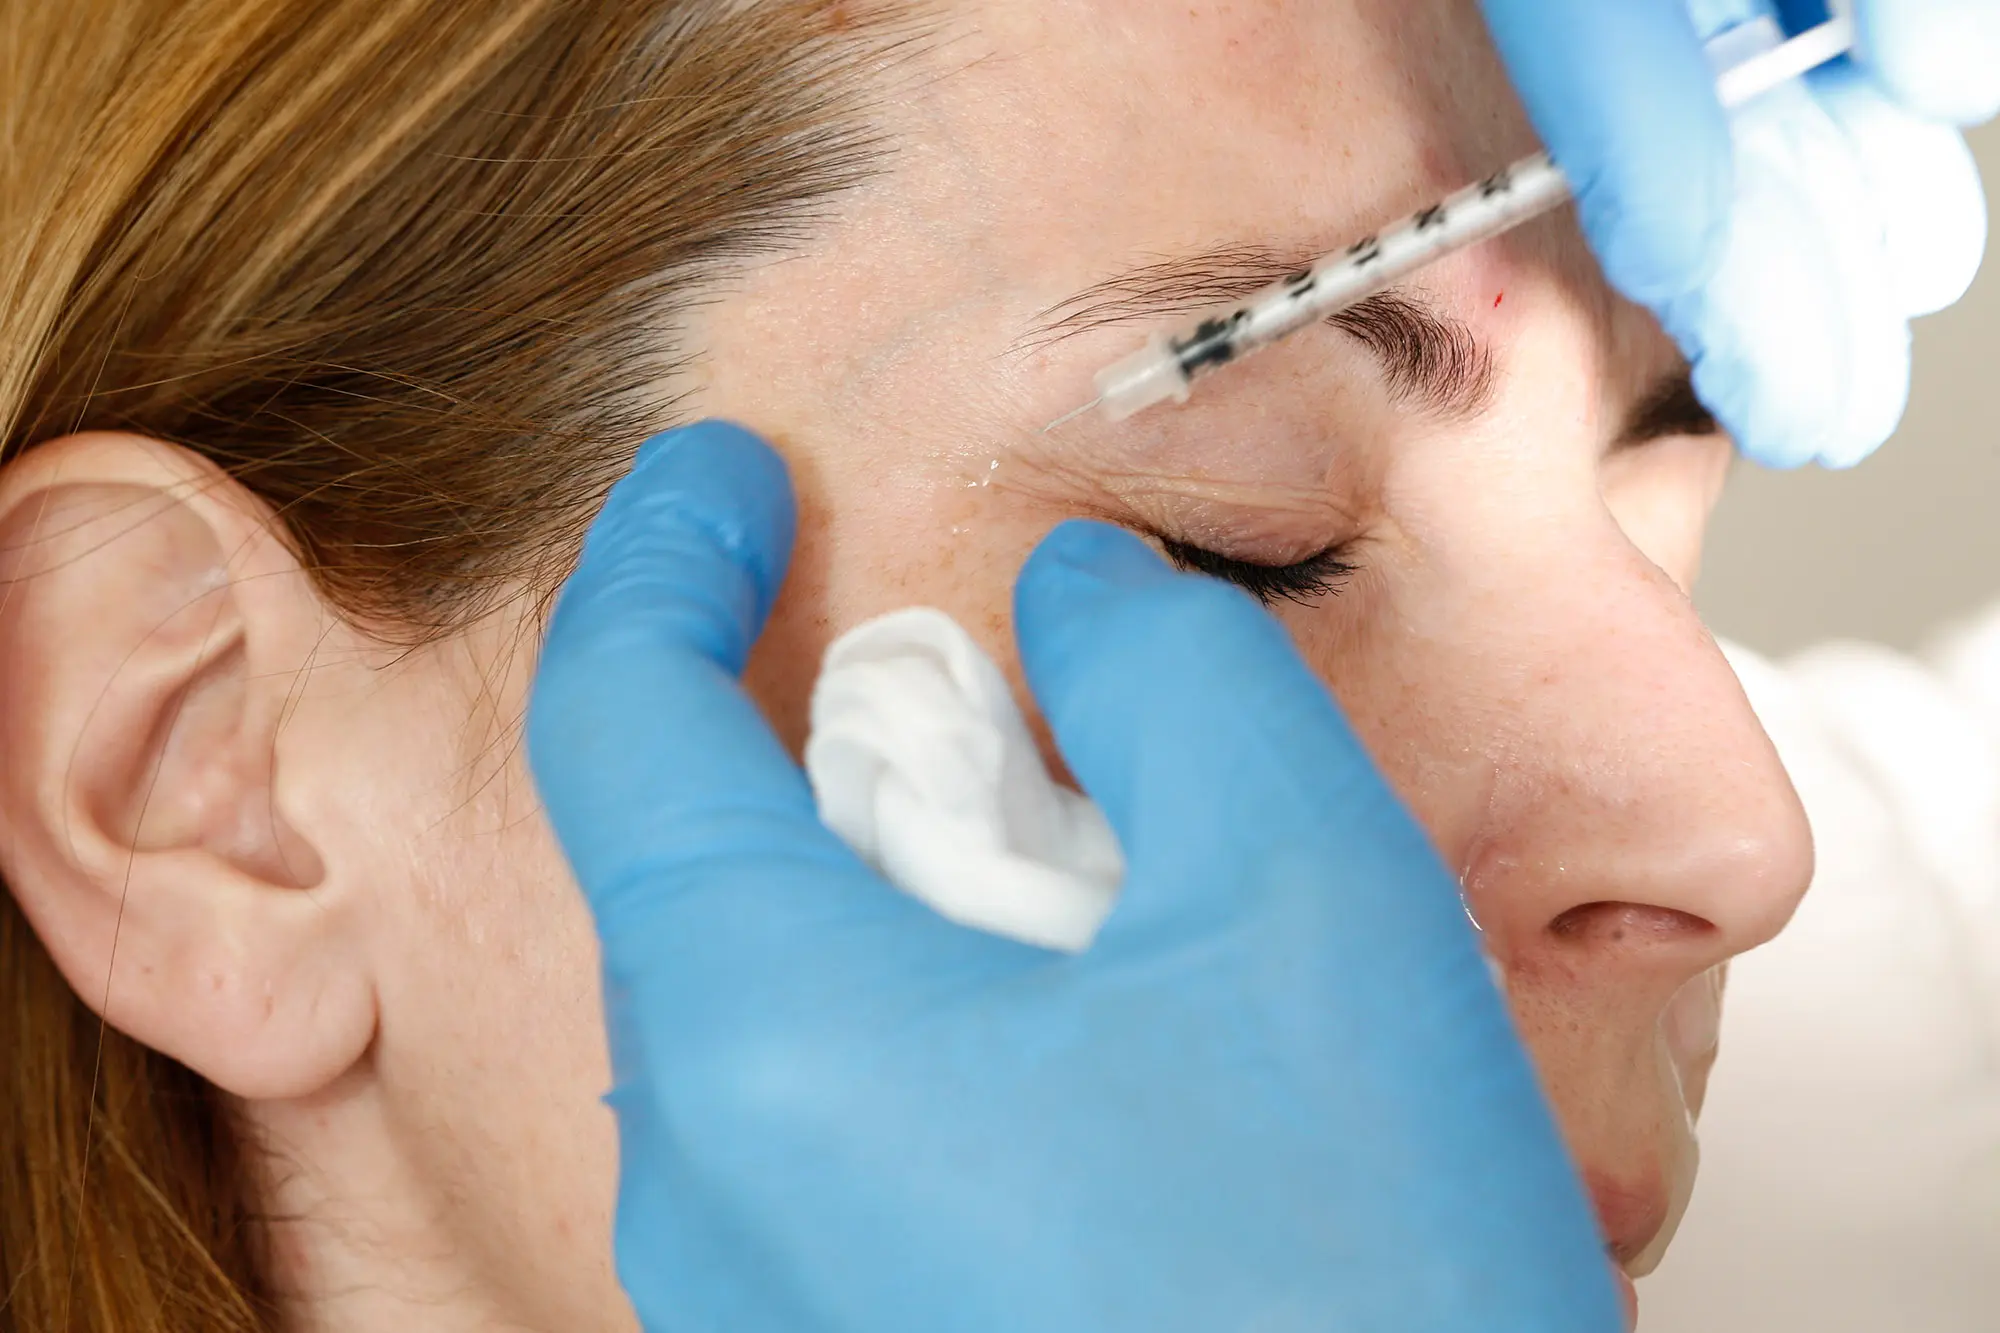 Can Eye Botox Cause Blindness